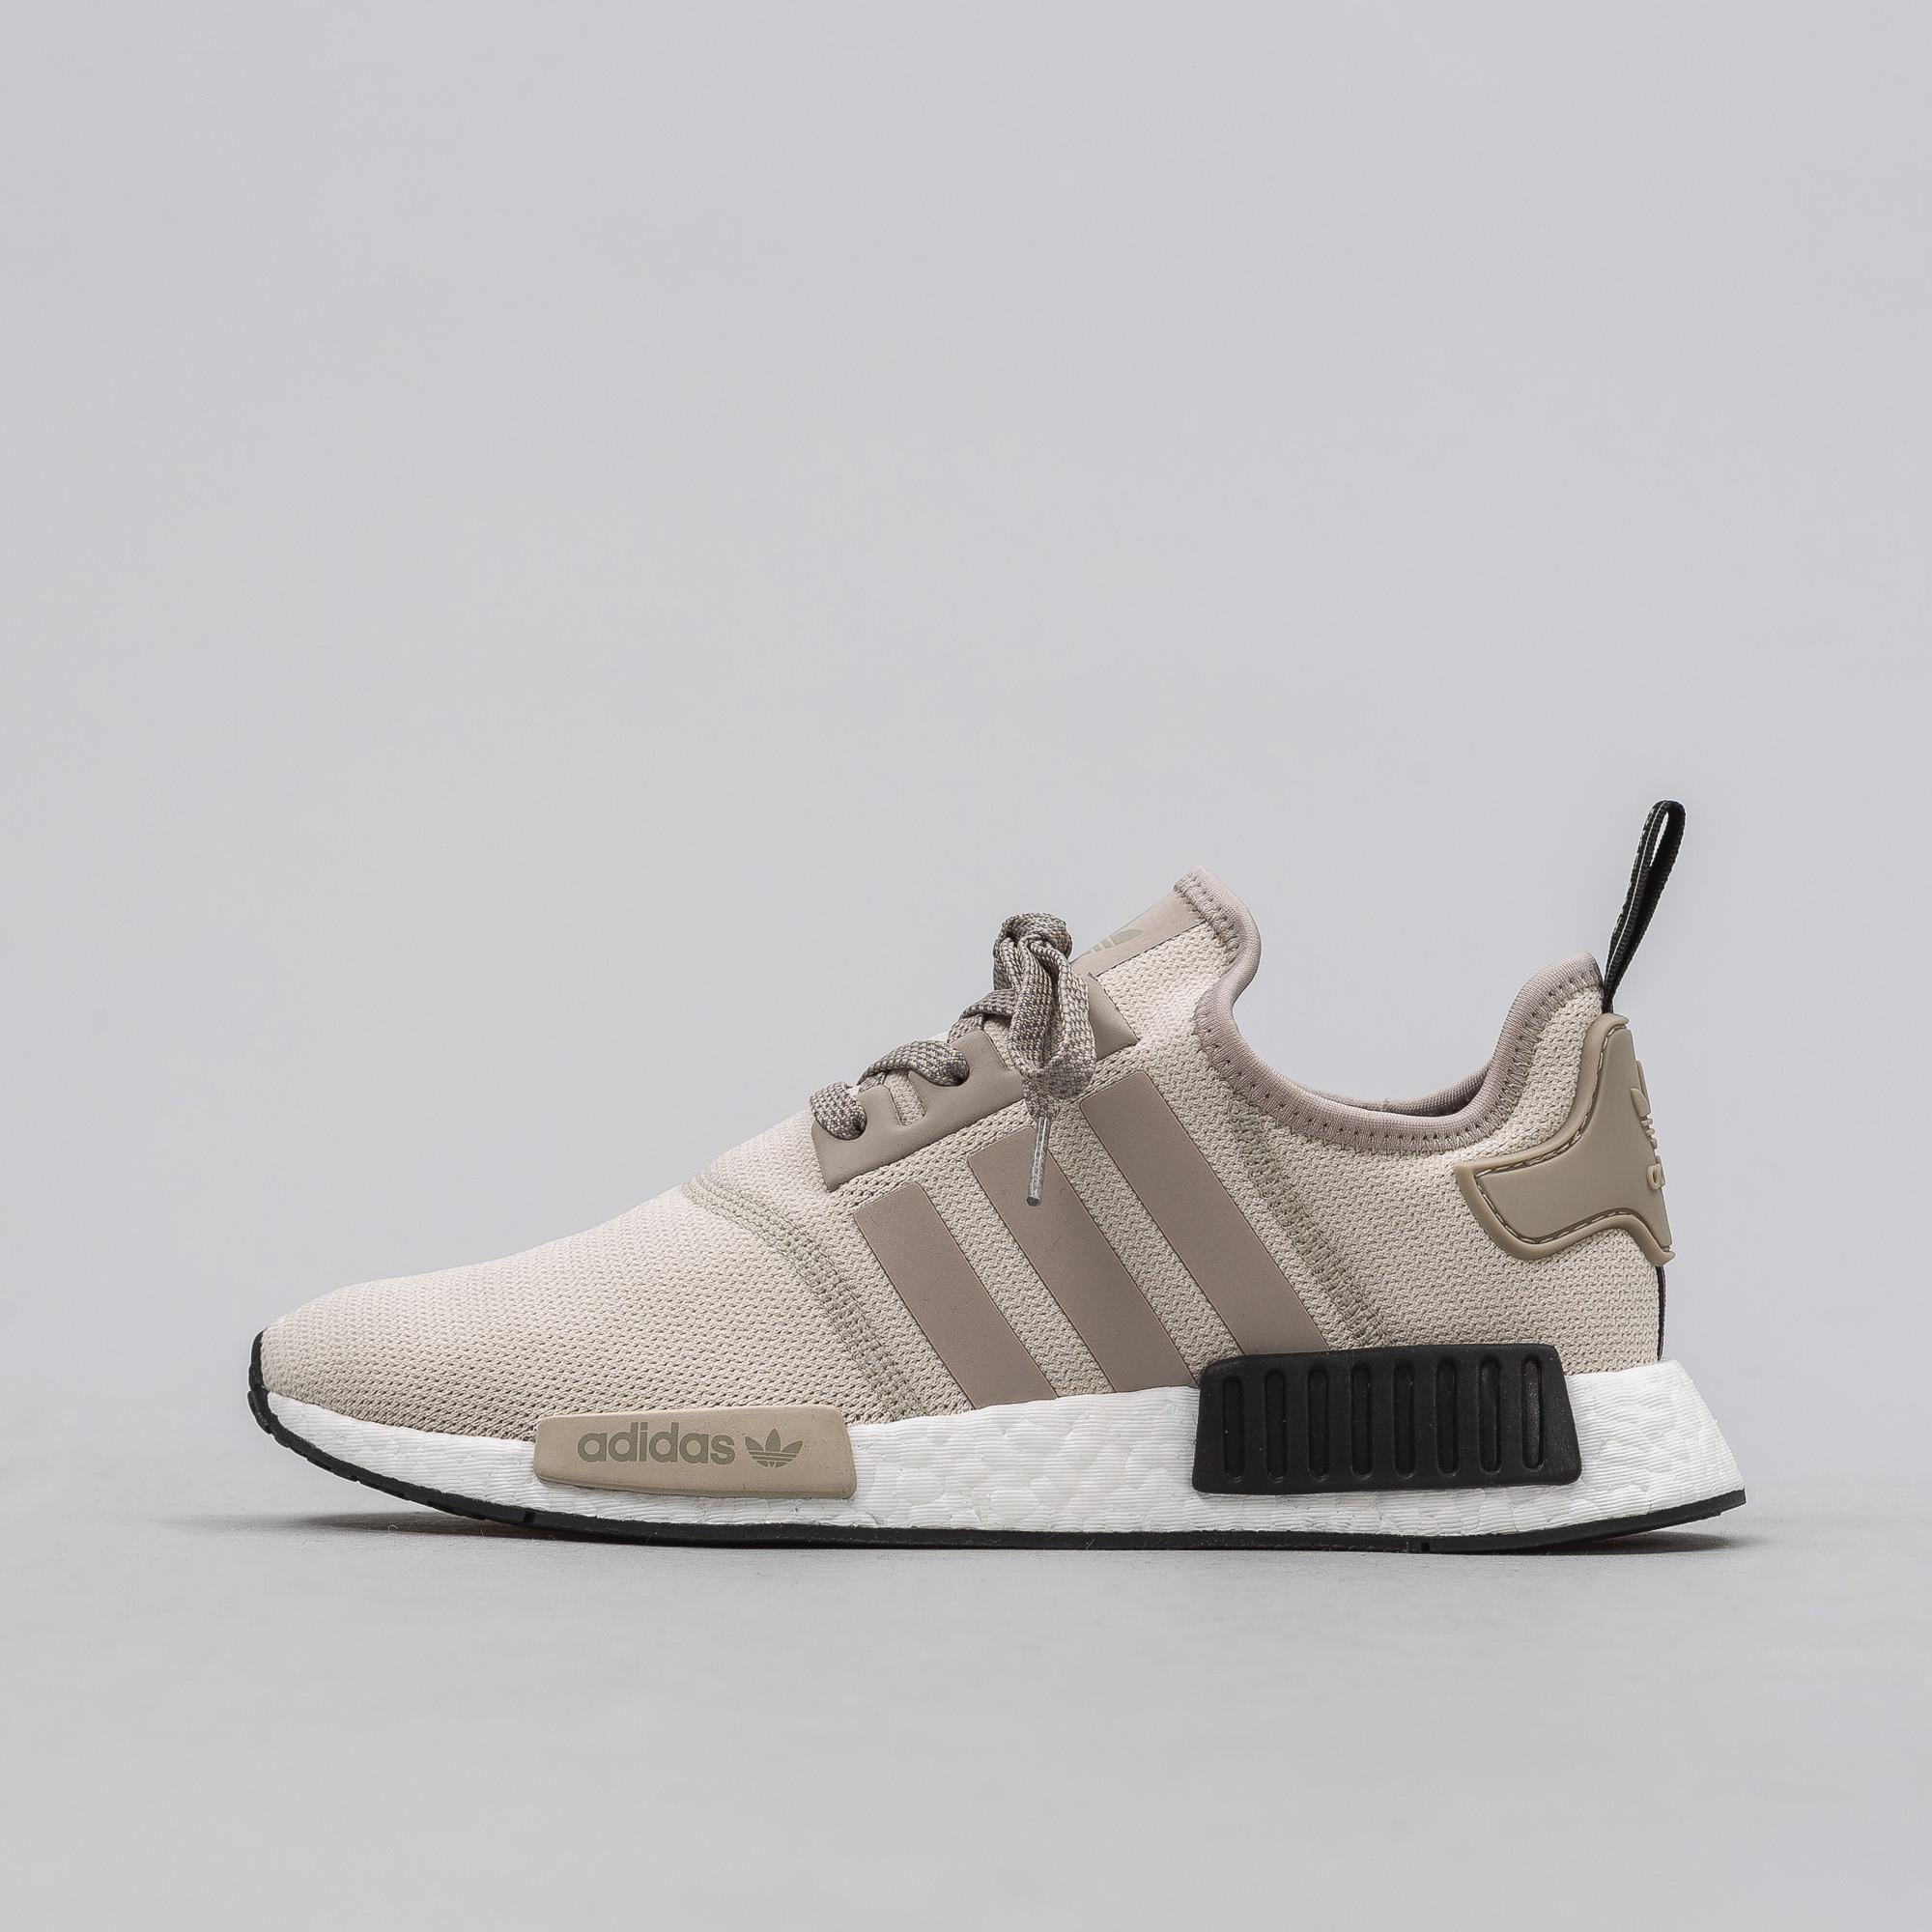 adidas Originals Rubber Nmd R1 In Light Brown for Men - Lyst